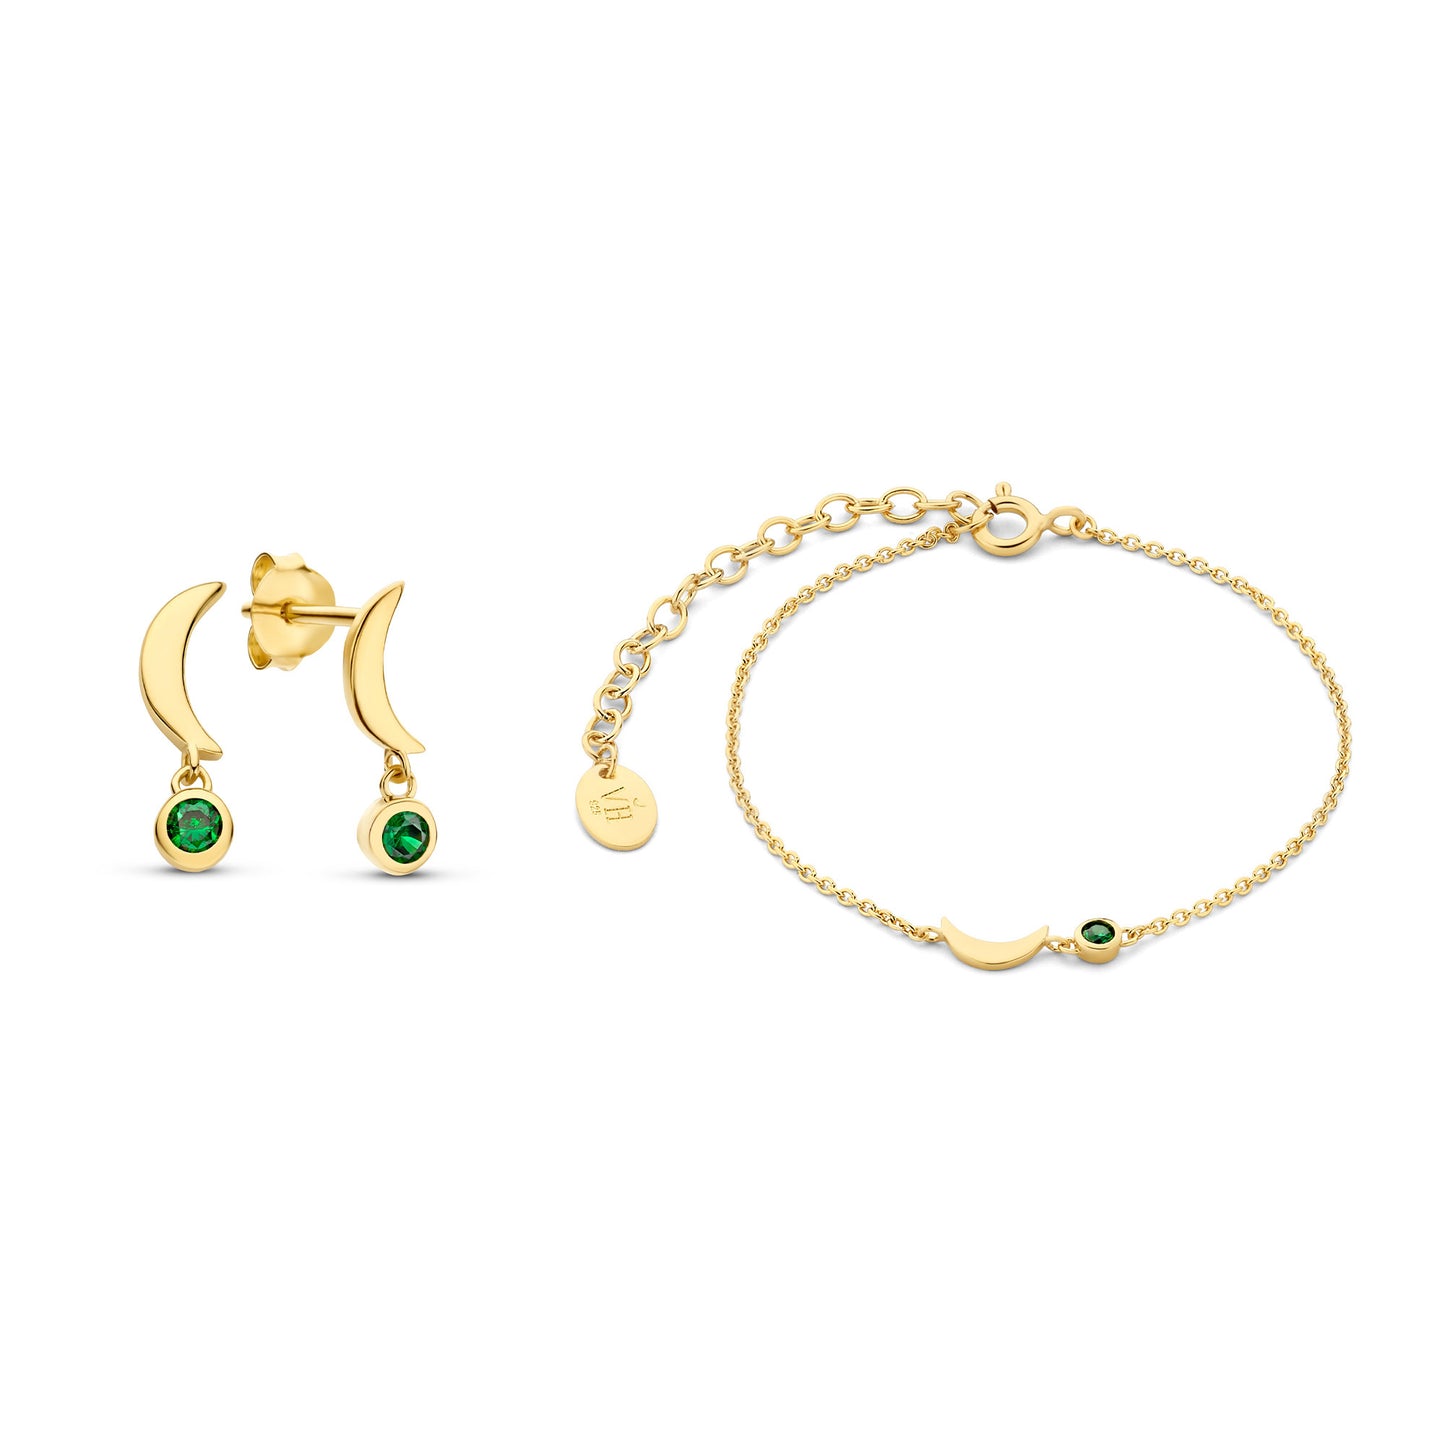 Violet's Gift 925 sterling silver gold plated bracelet and ear studs gift set with green zirconia stones